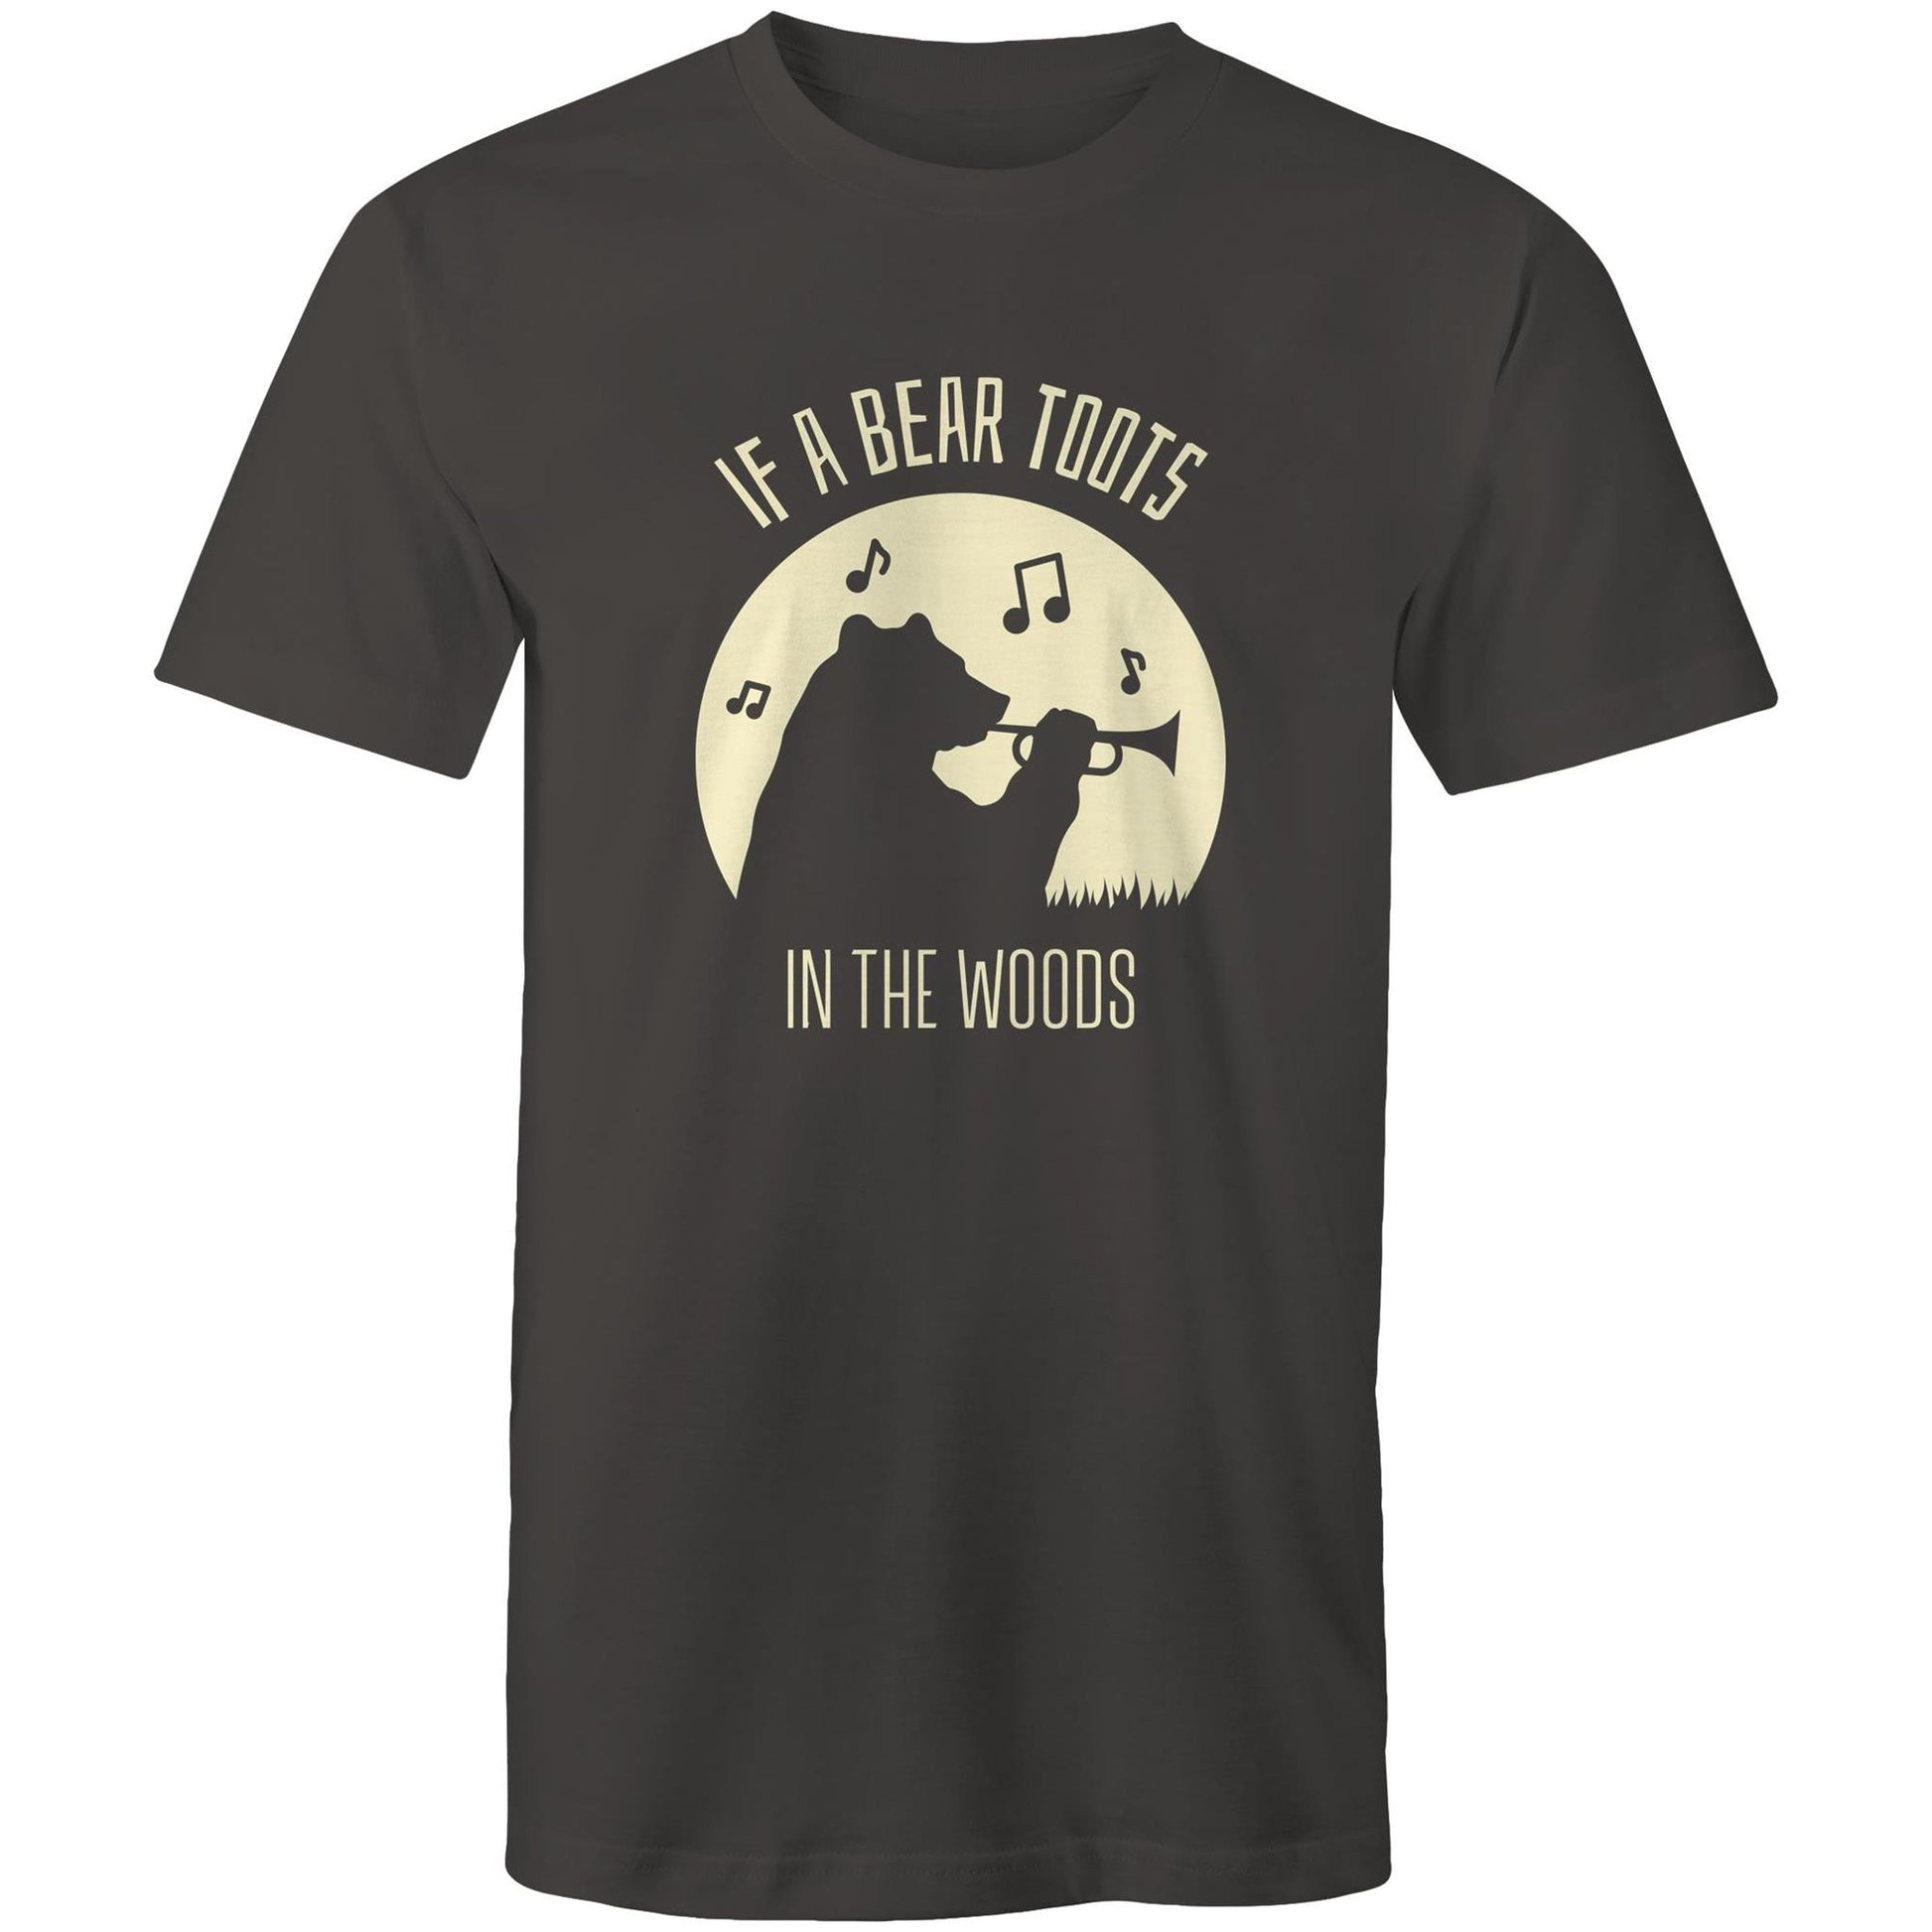 If A Bear Toots In The Woods, Trumpet Player - Mens T-Shirt Charcoal Mens T-shirt animal Music